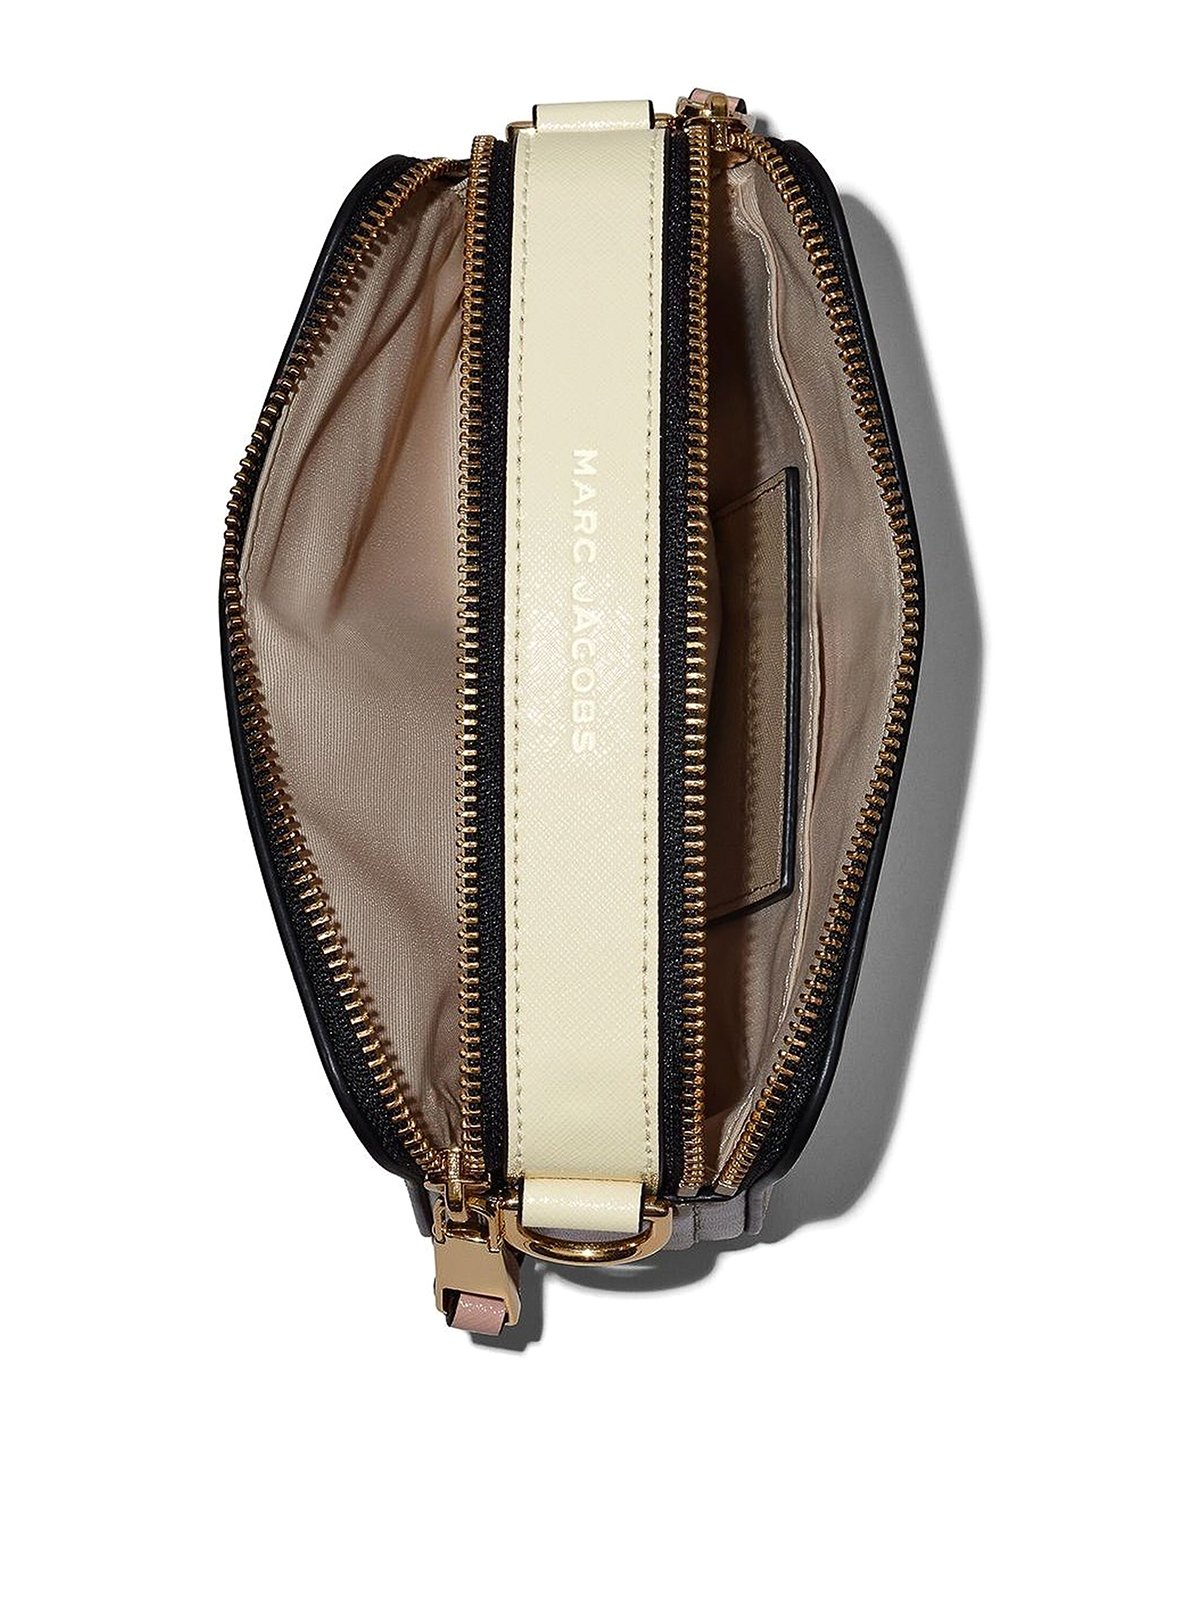 Marc Jacobs Snapshot Leather Cross-body Bag in Brown